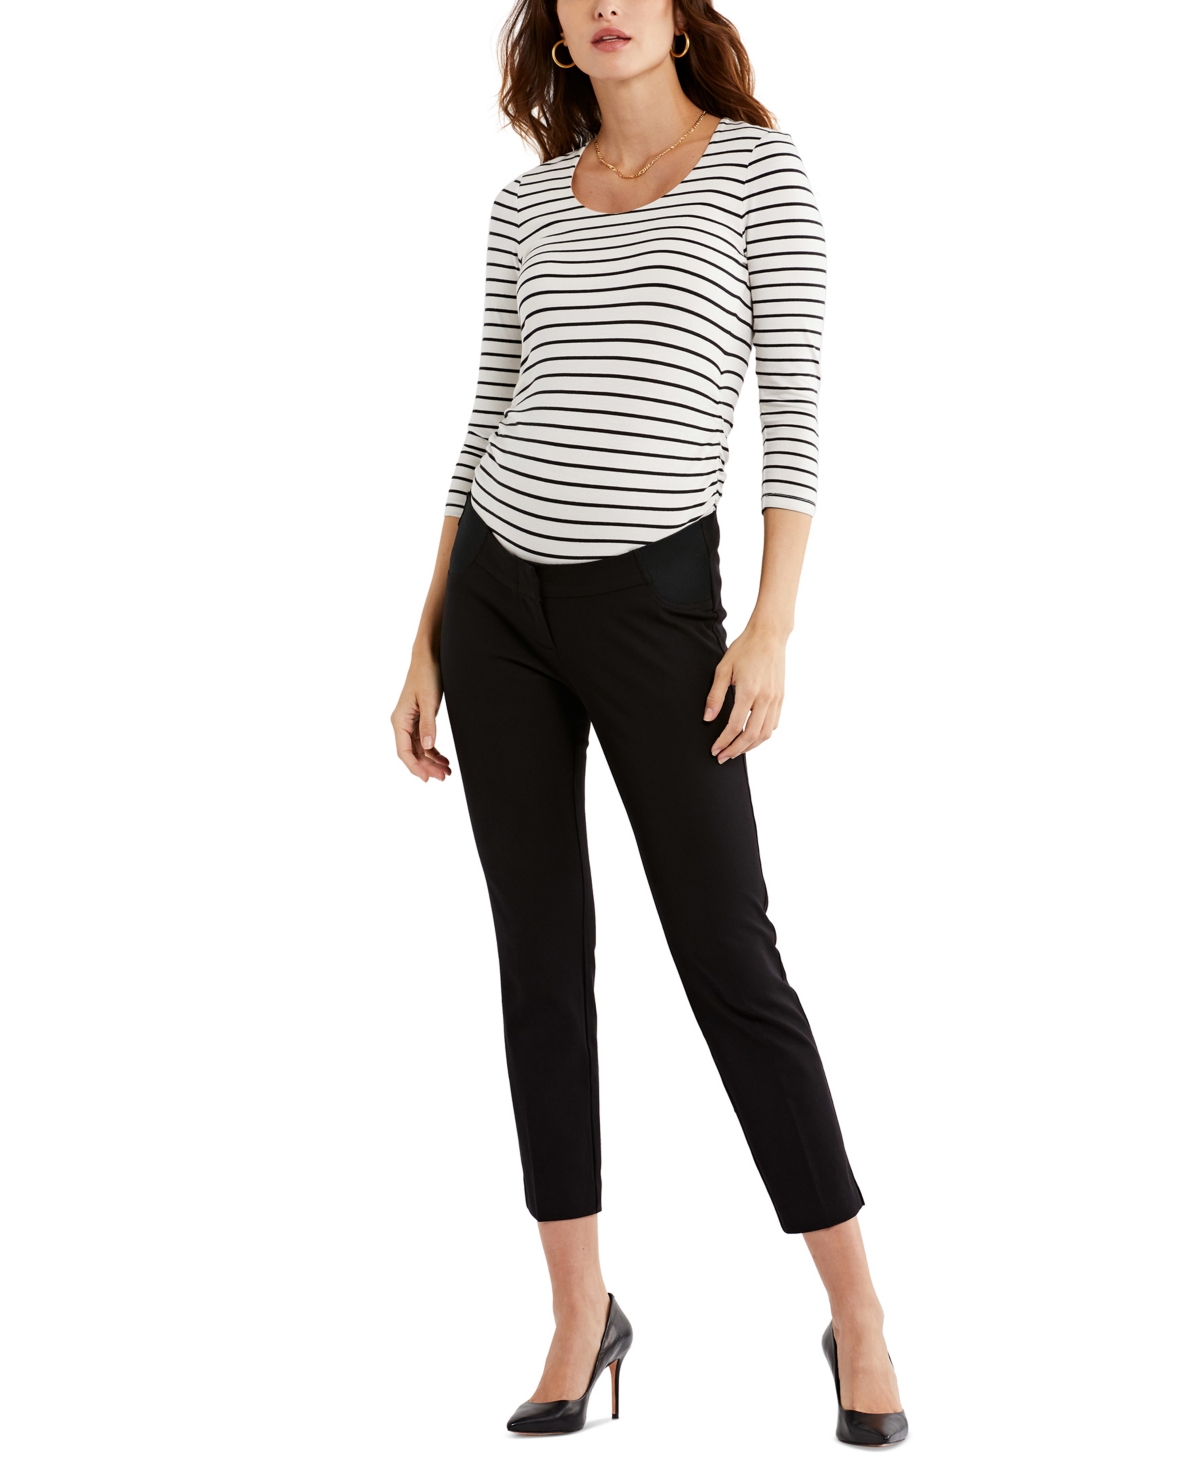  Luxe Side Ruched 3/4 Sleeve Maternity T Shirt